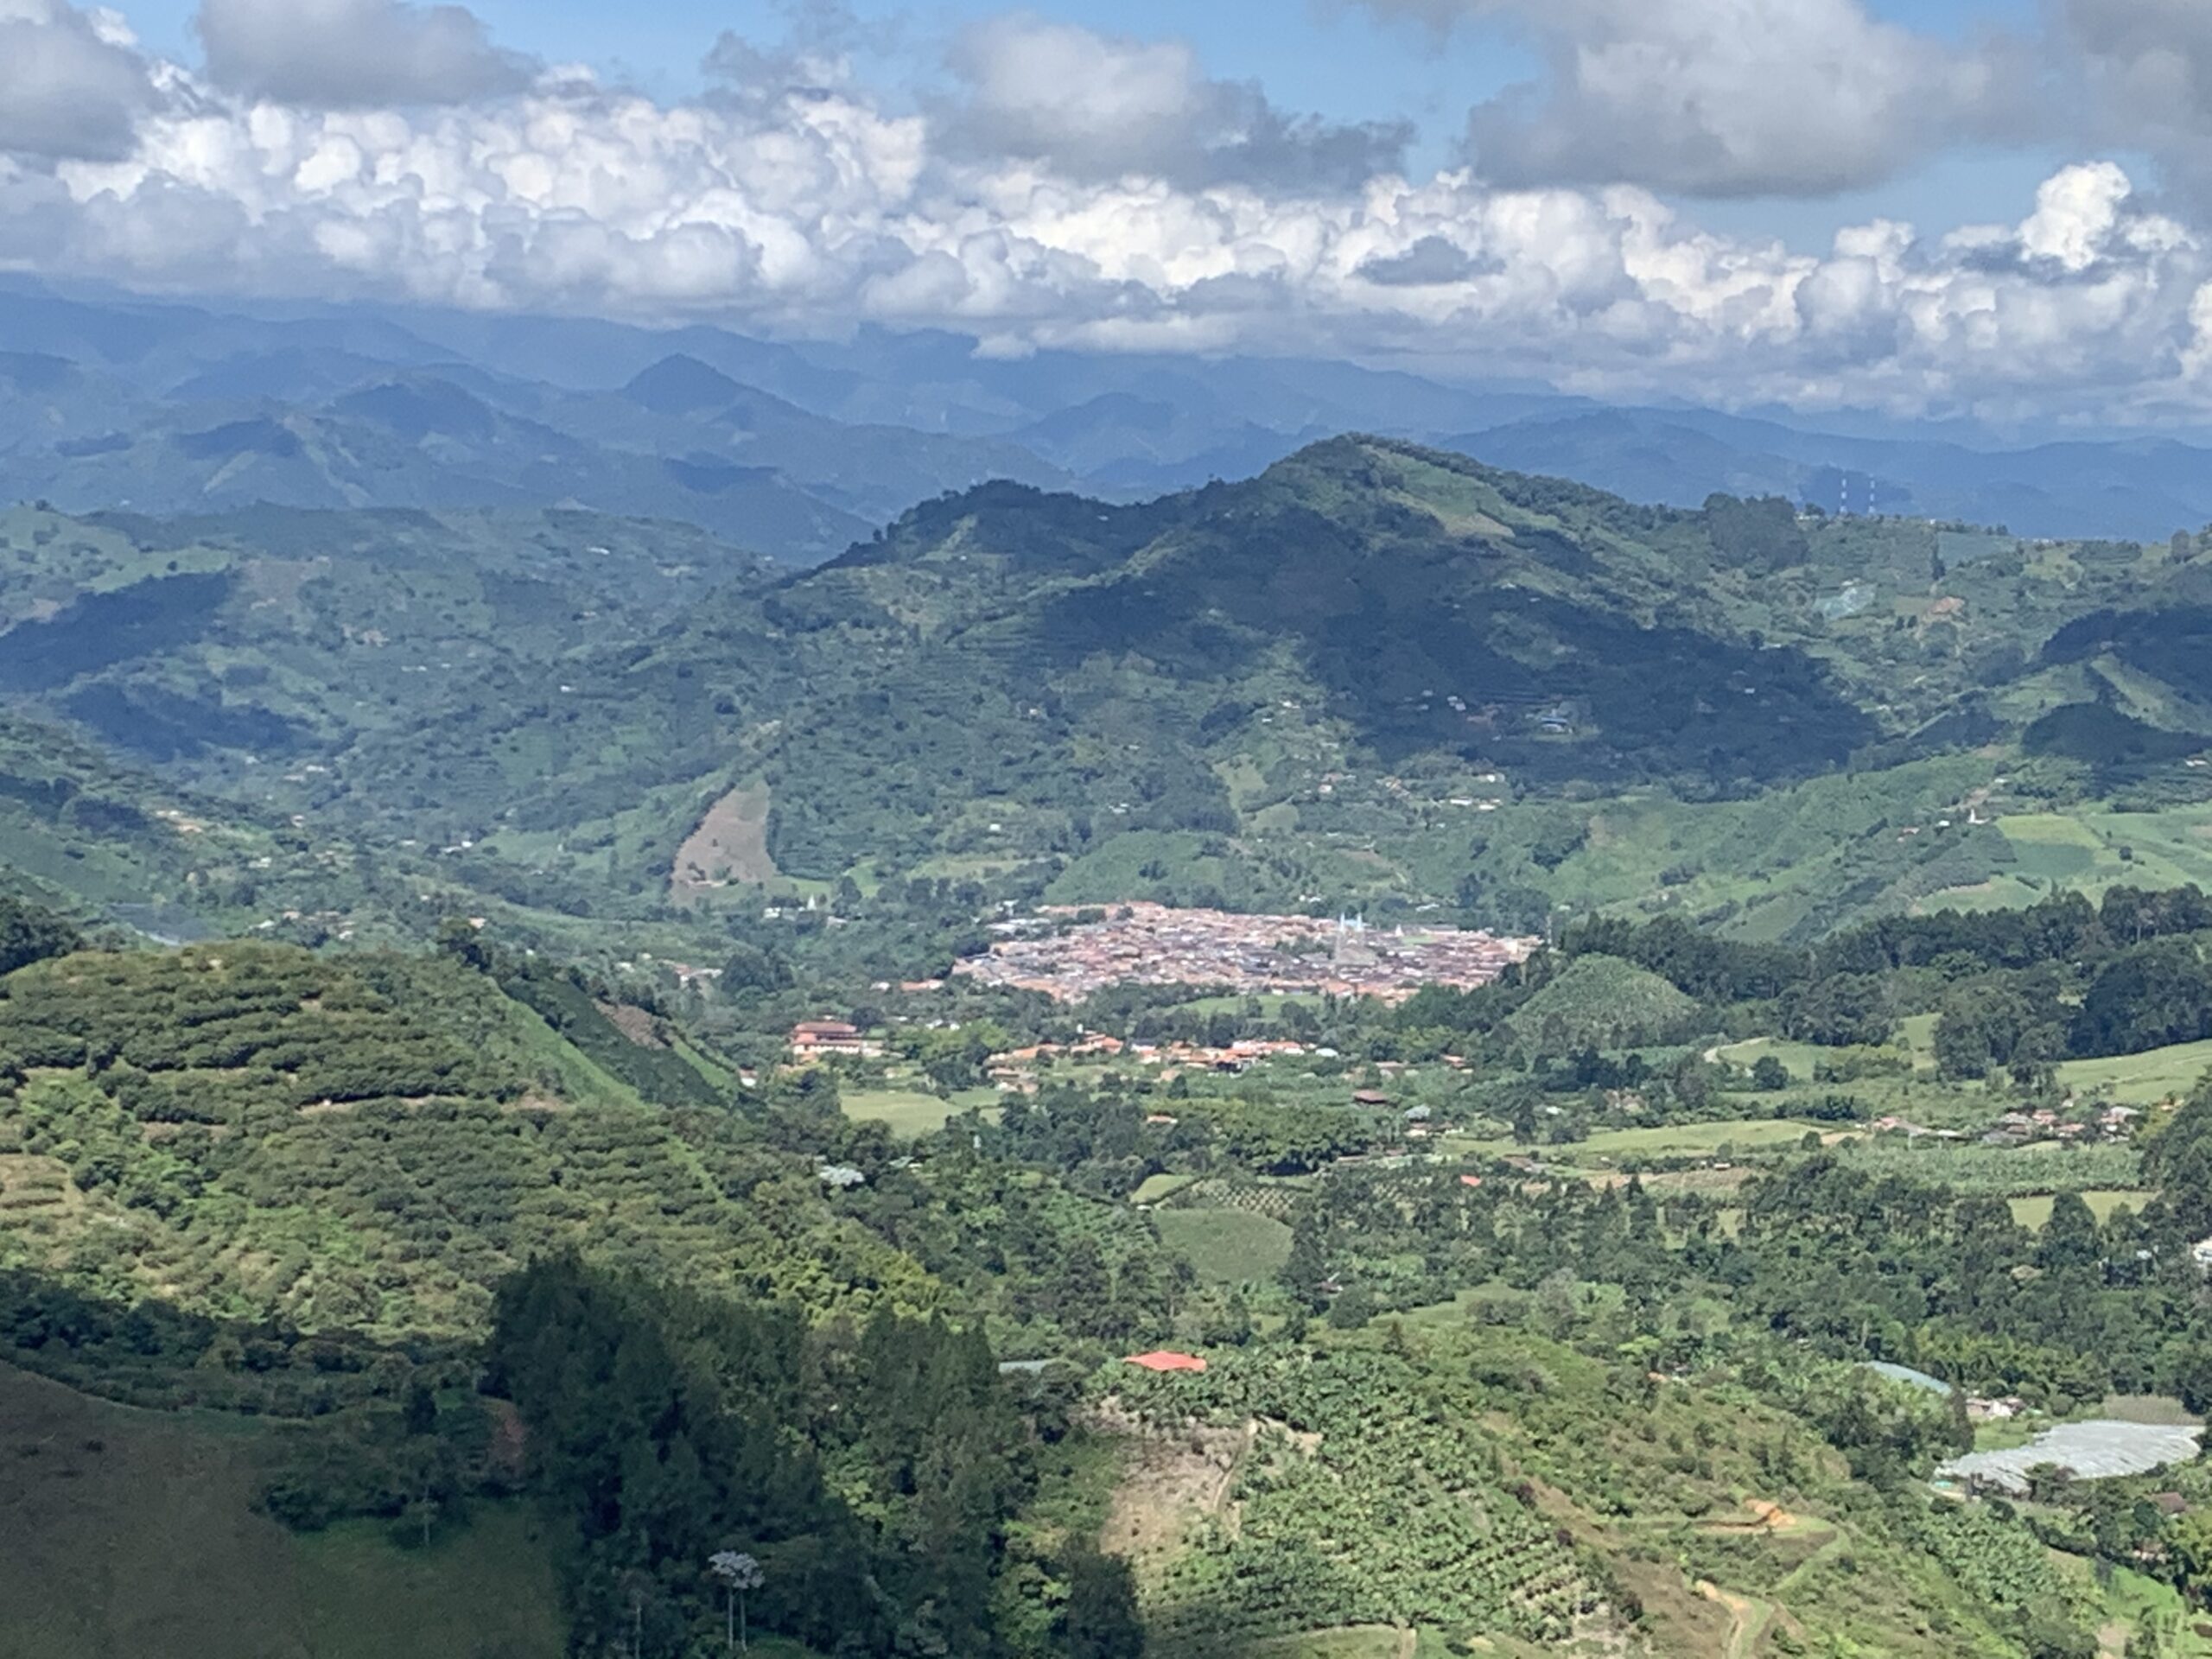 View of the town of Jardin and the many of the coffee plantations around the hills of this coffee region